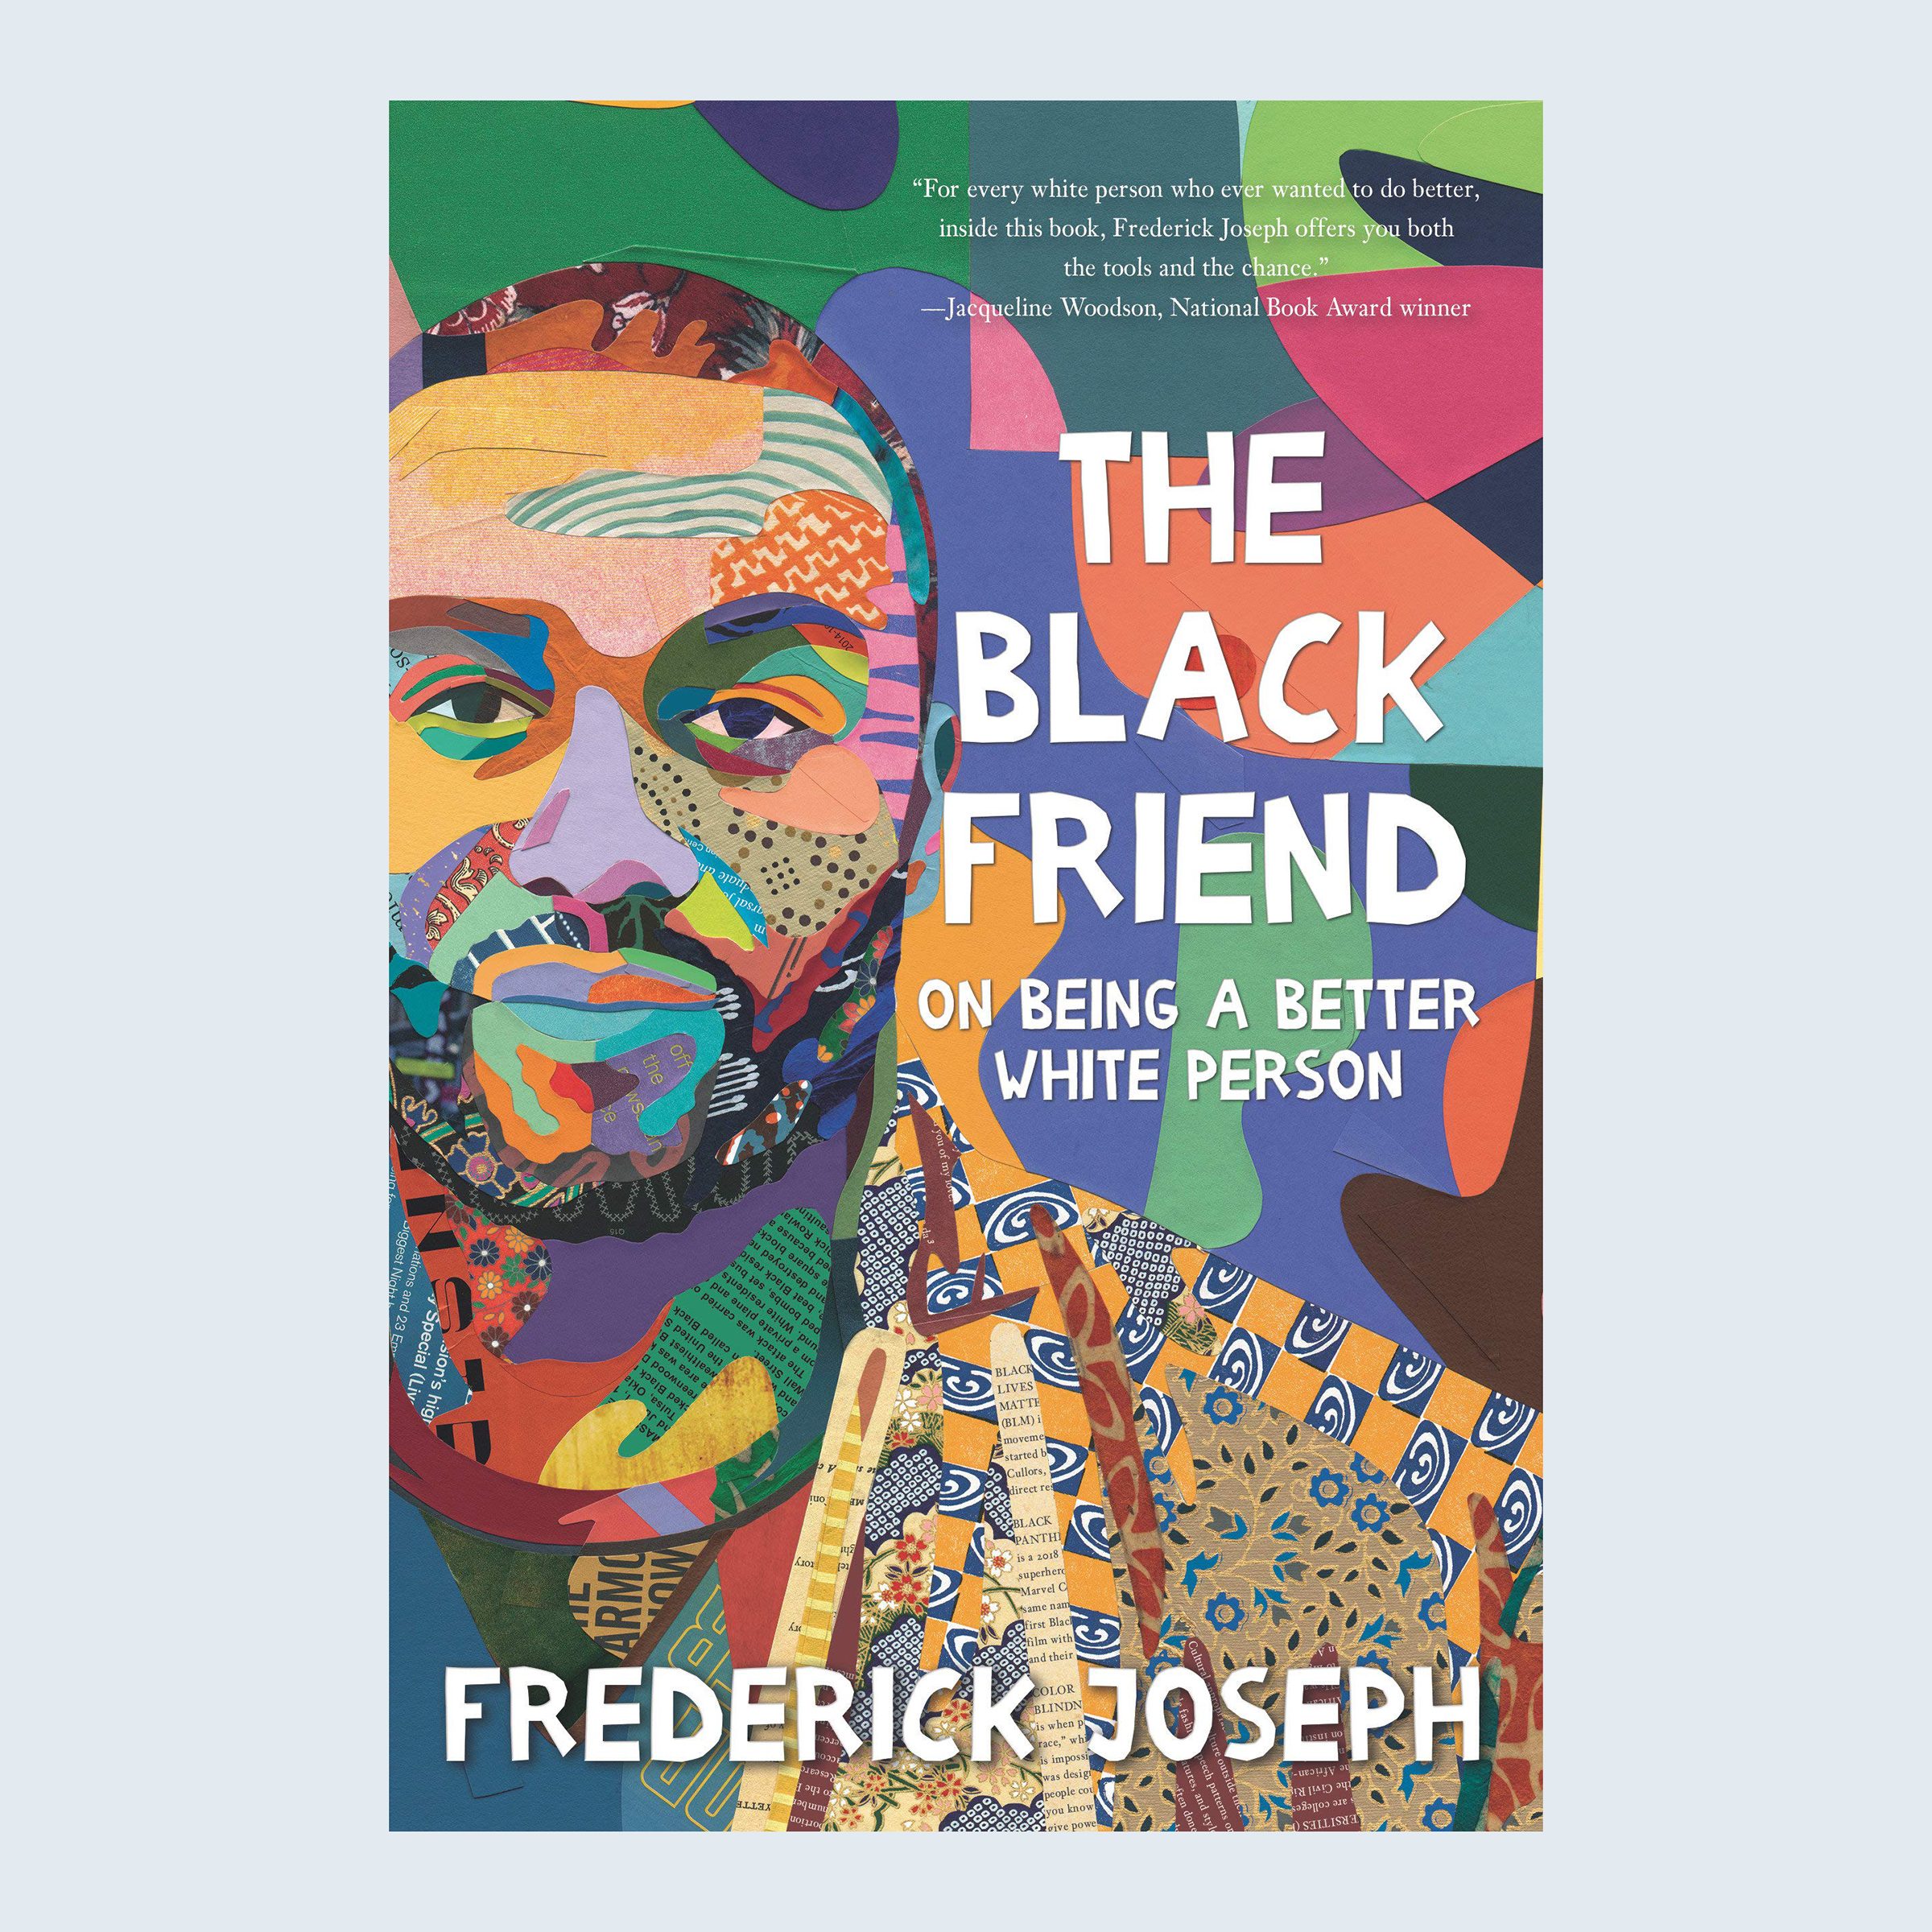 The Black Friend: On Being a Better White Person by Frederick Joseph